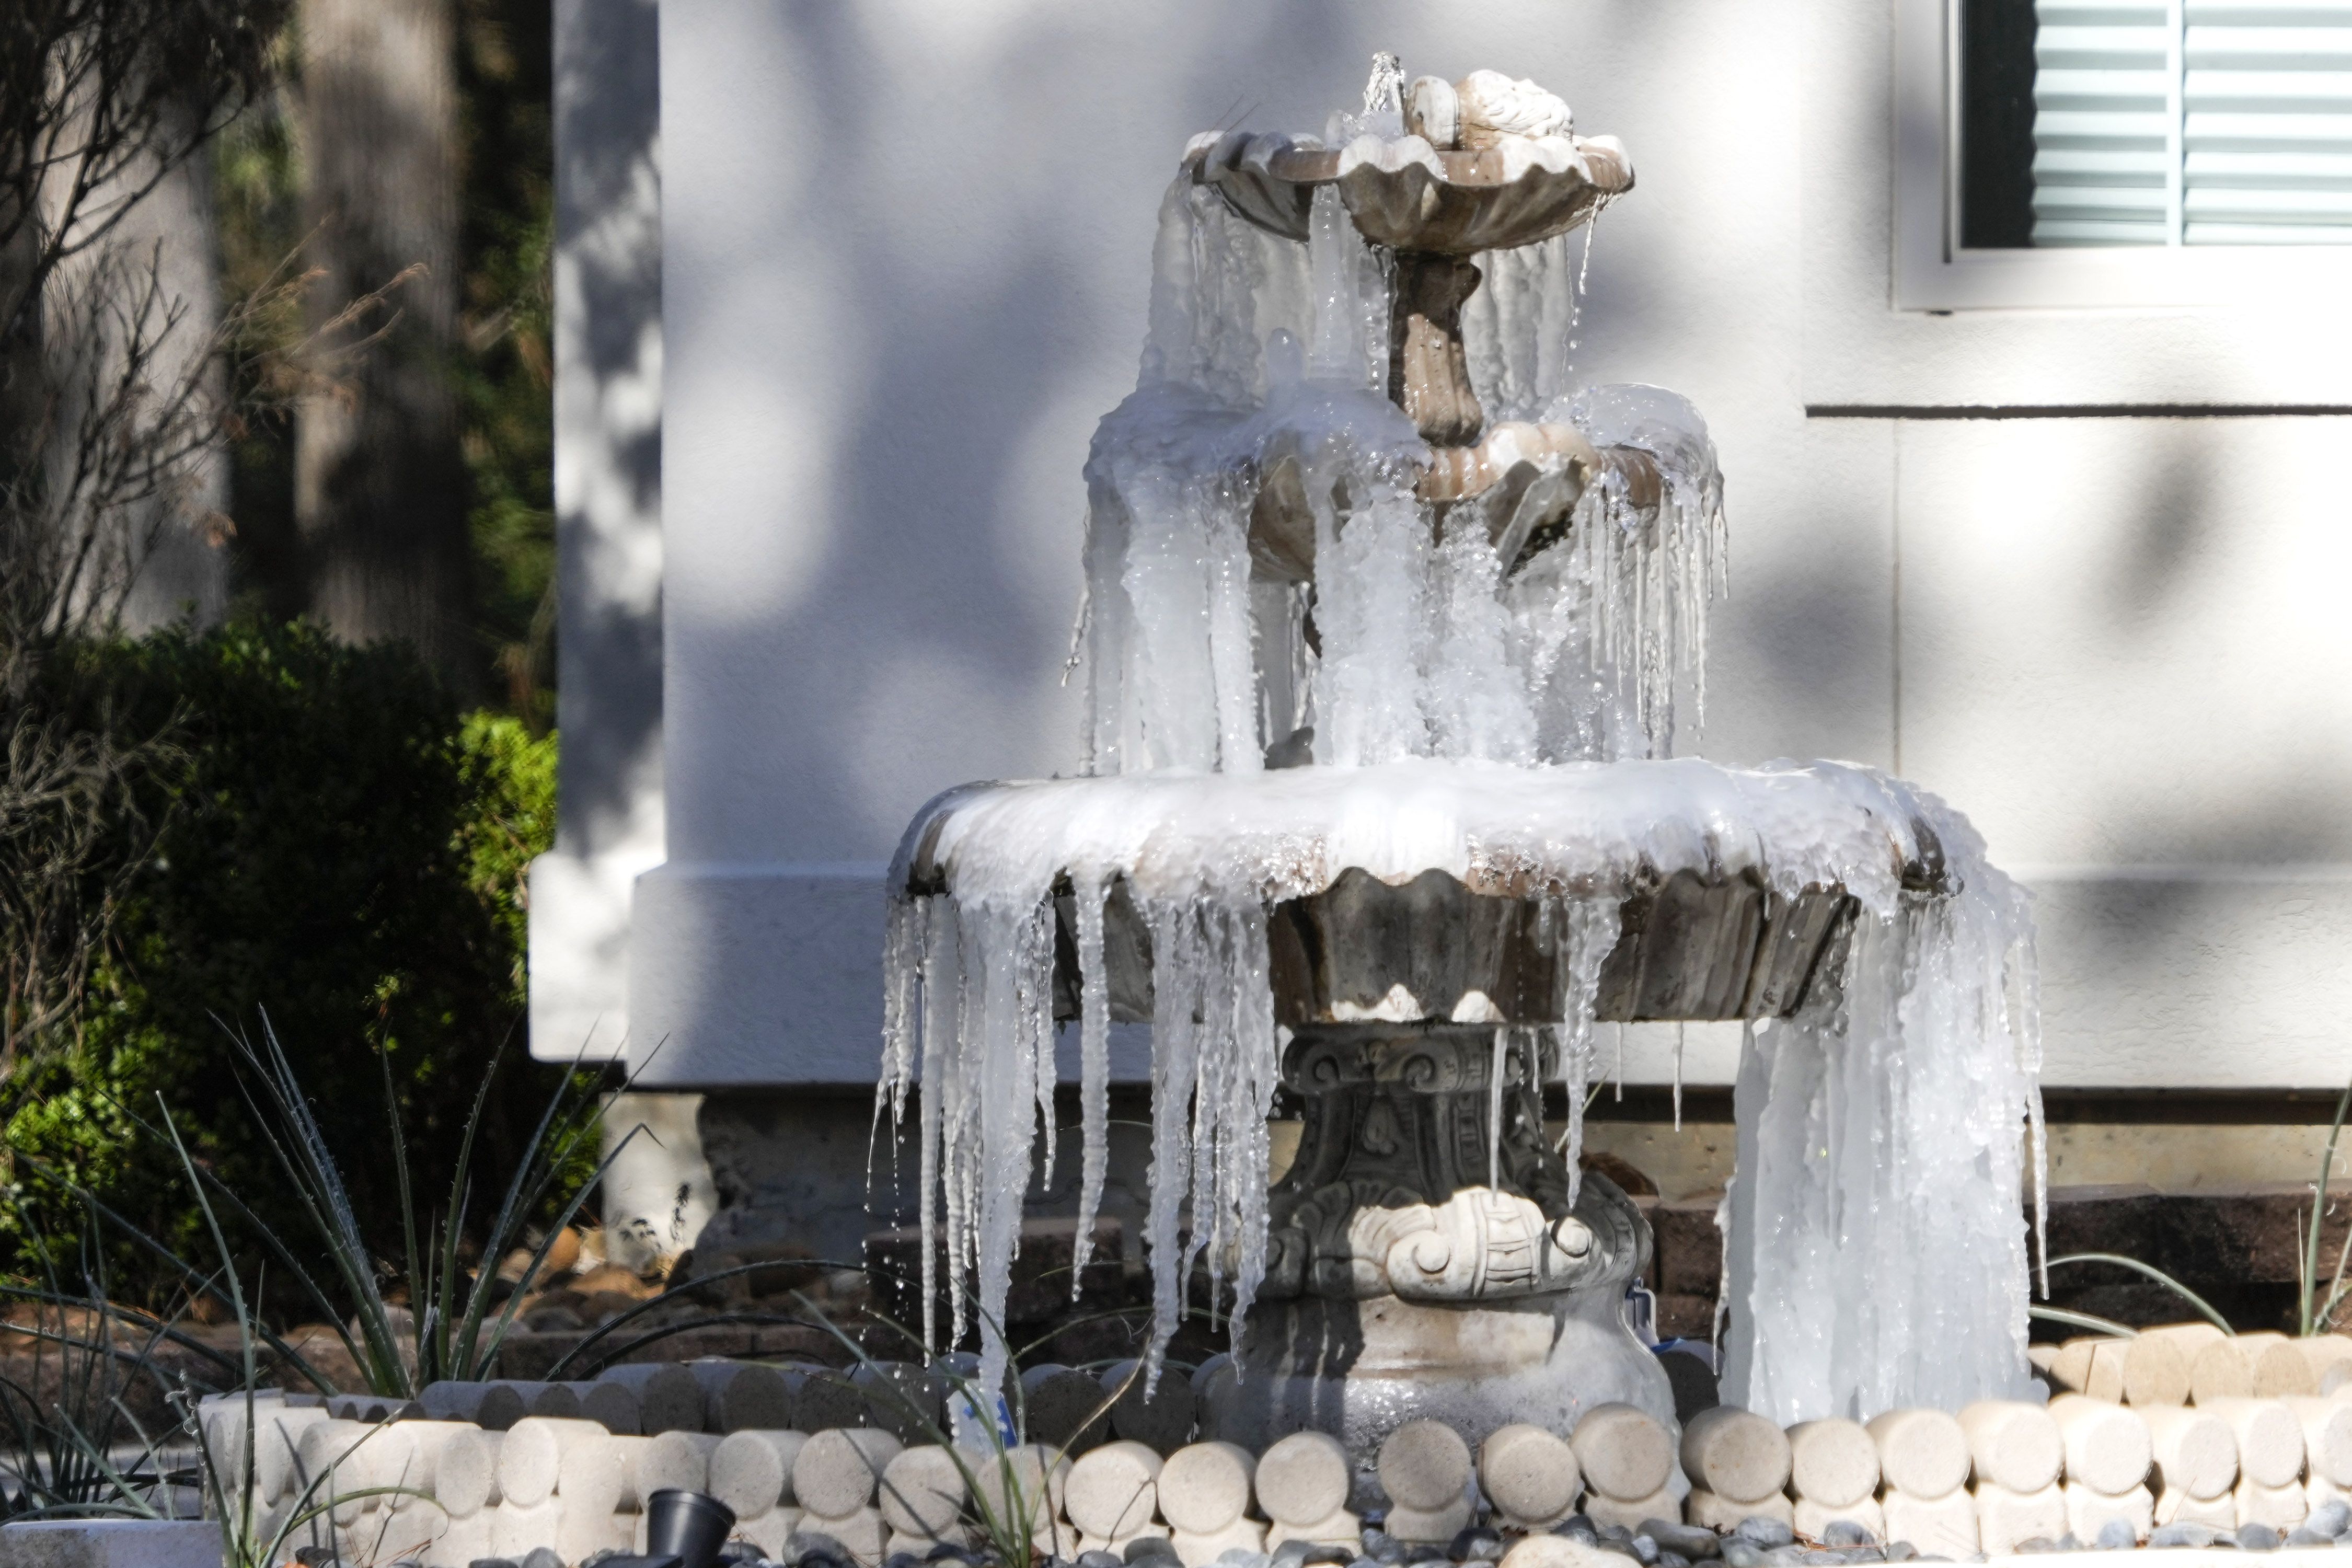  Ice is formed on a fountain in the High Meadow Ranch area on Tuesday, Jan. 16, 2024 in Magnolia. The Magnolia neighborhood has experience a limited natural gas supply during this week's freeze, as the homeowner's association reports a damaged gas pipe caused pressure issues, according to an HOA email provided to the Chronicle. 